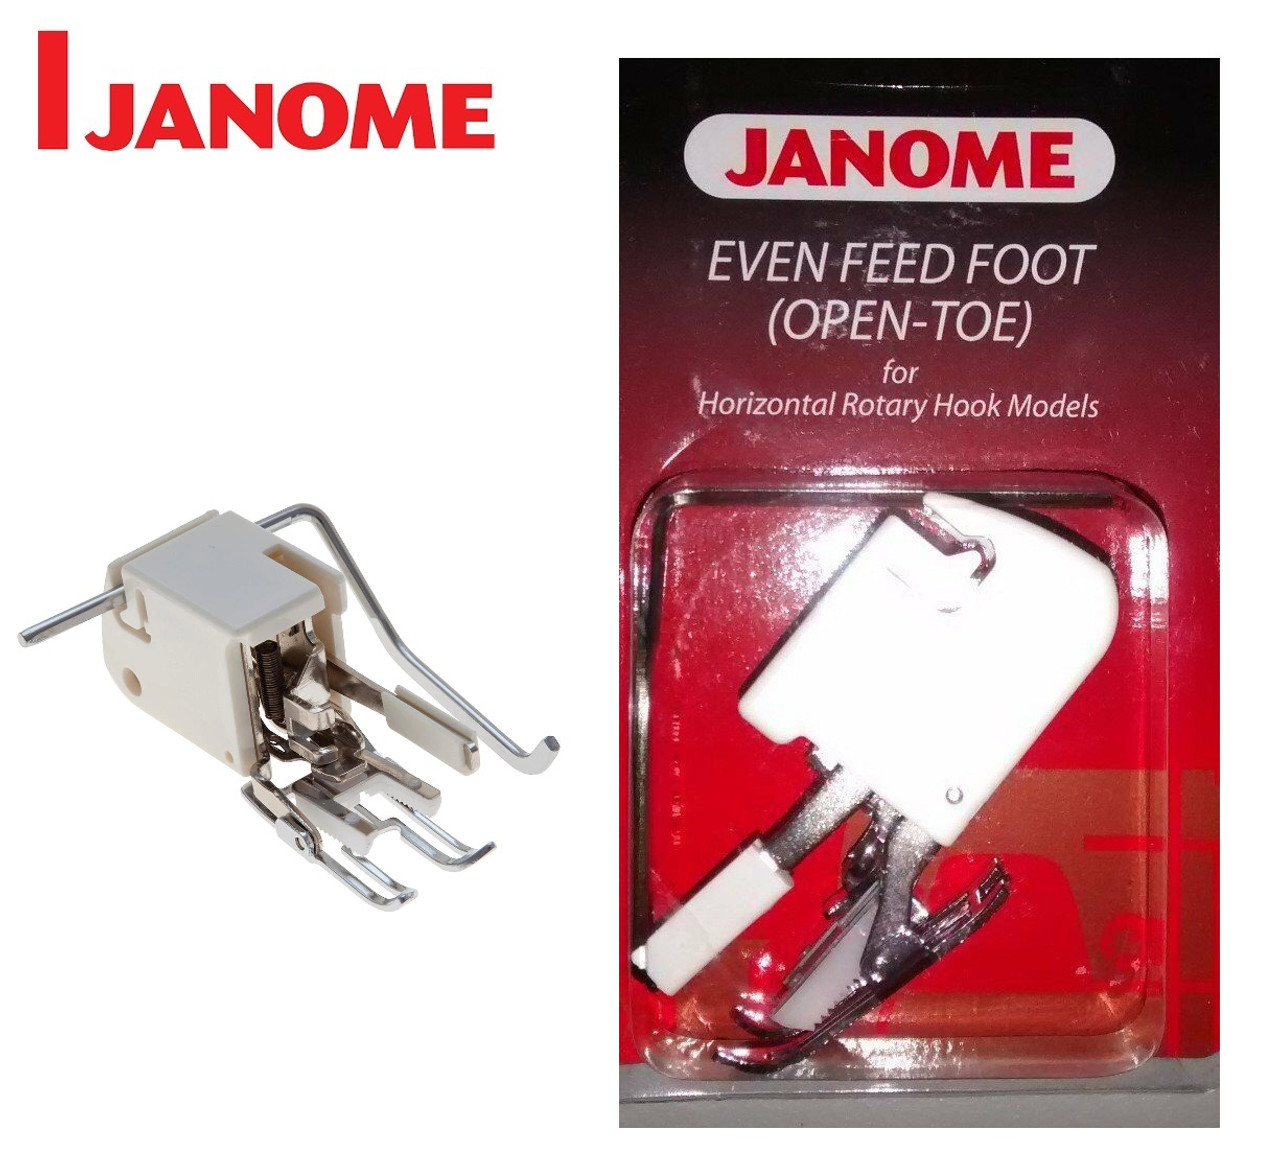 No Cat B GENUINE JANOME OPEN TOE WALKING EVEN FEED FOOT 200339007 Guide 